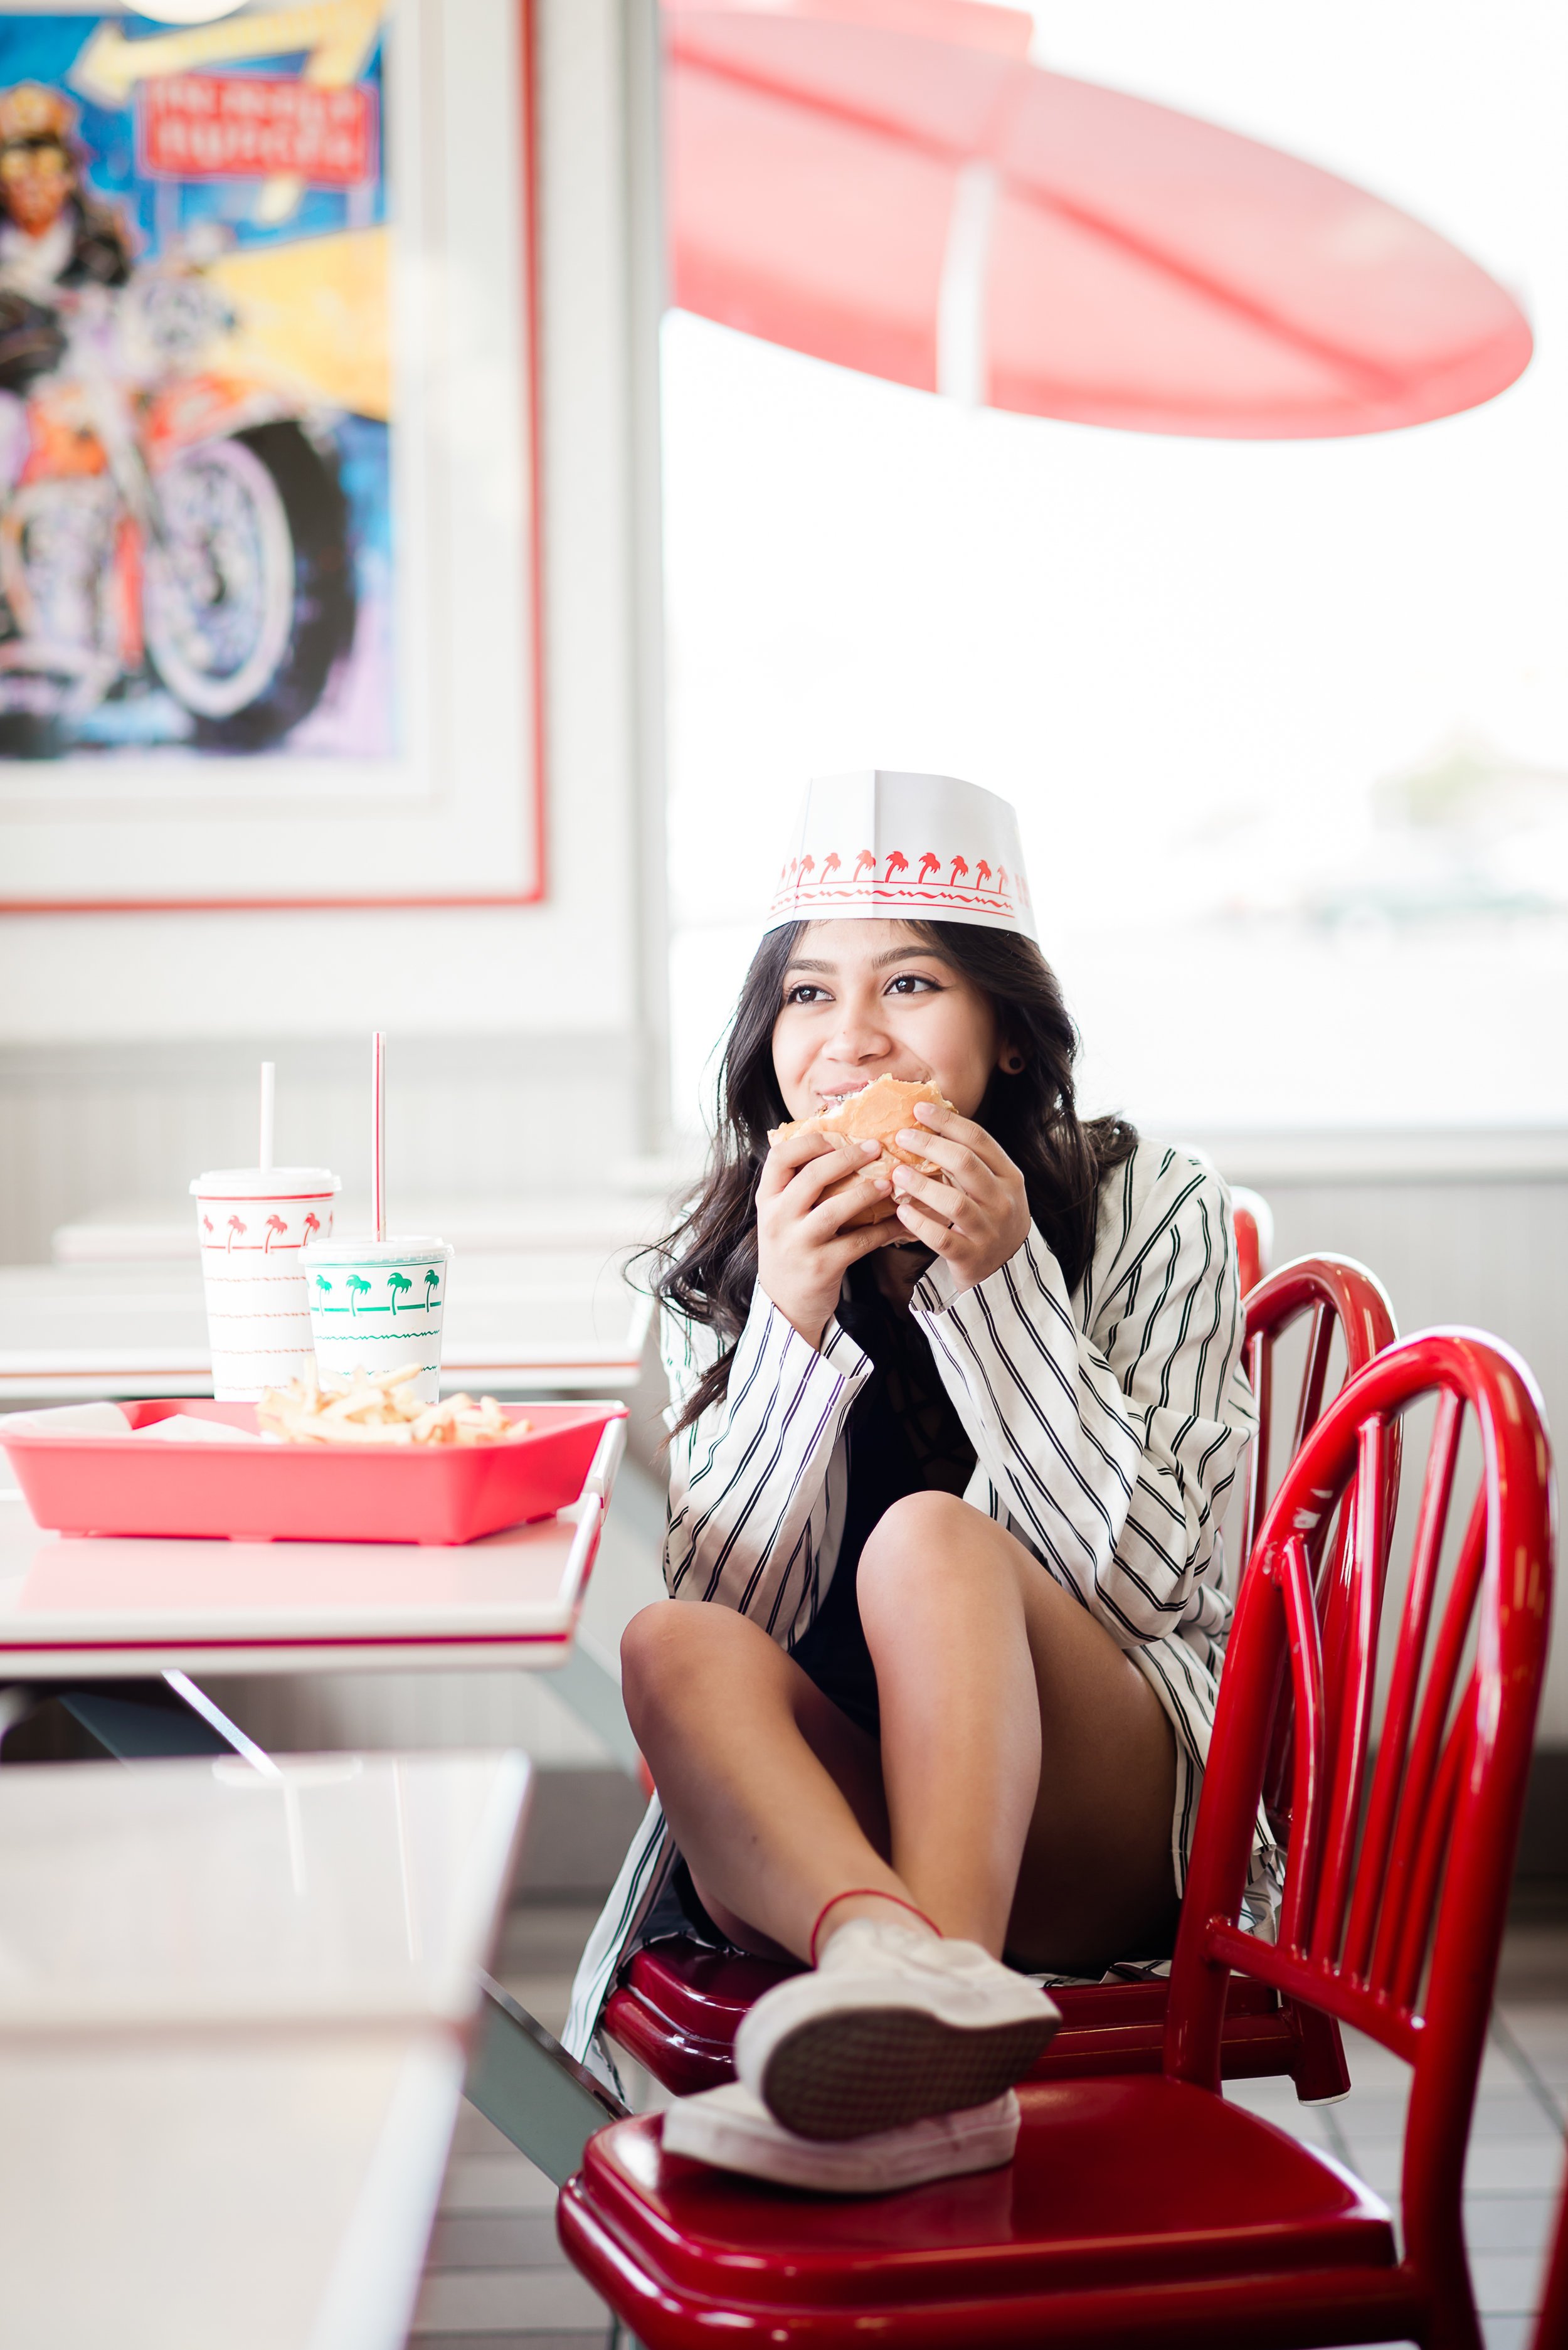 IN - N - OUT Photoshoot